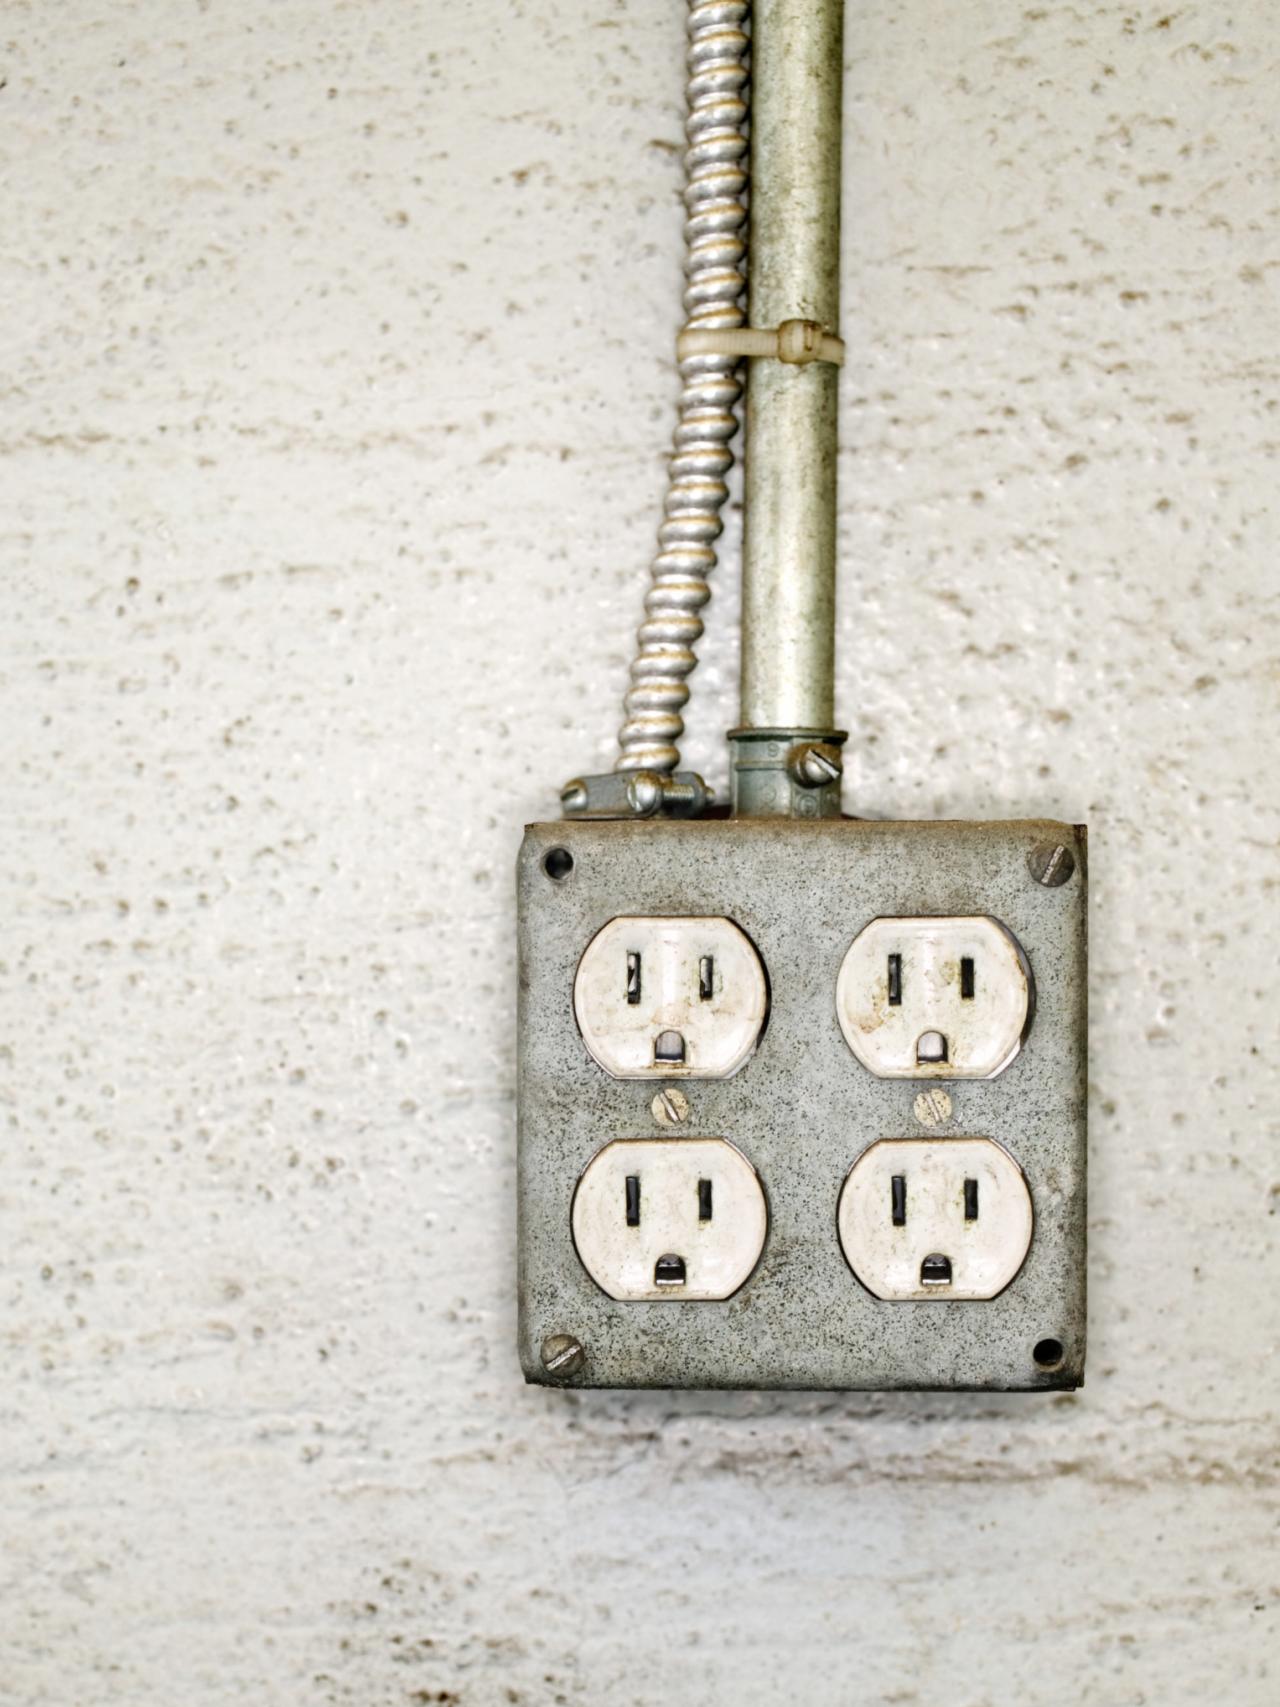 Electric outlet exposed photo